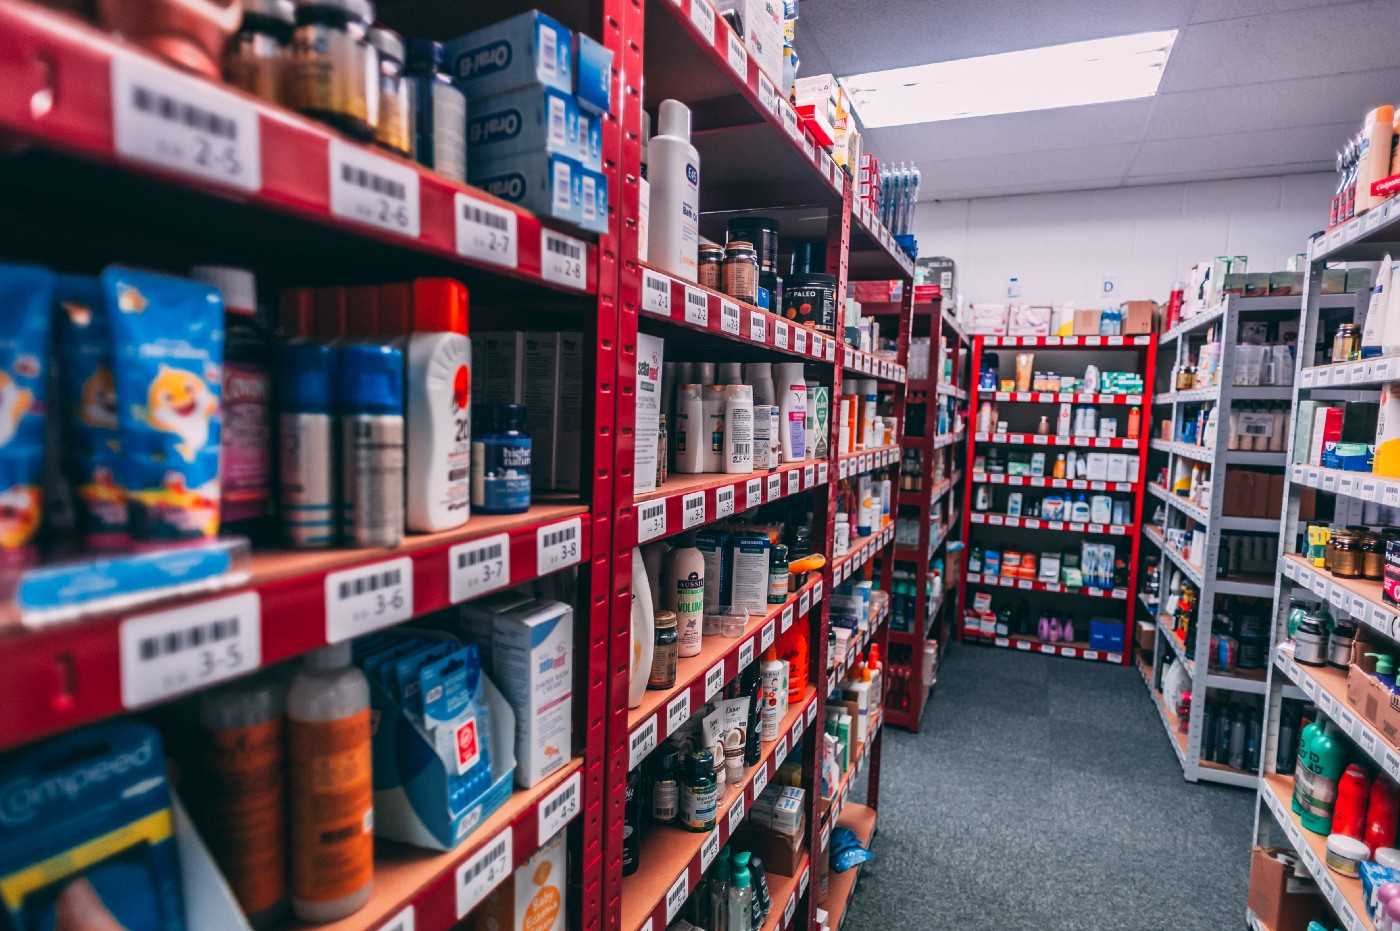 Image of products on shelves in a store